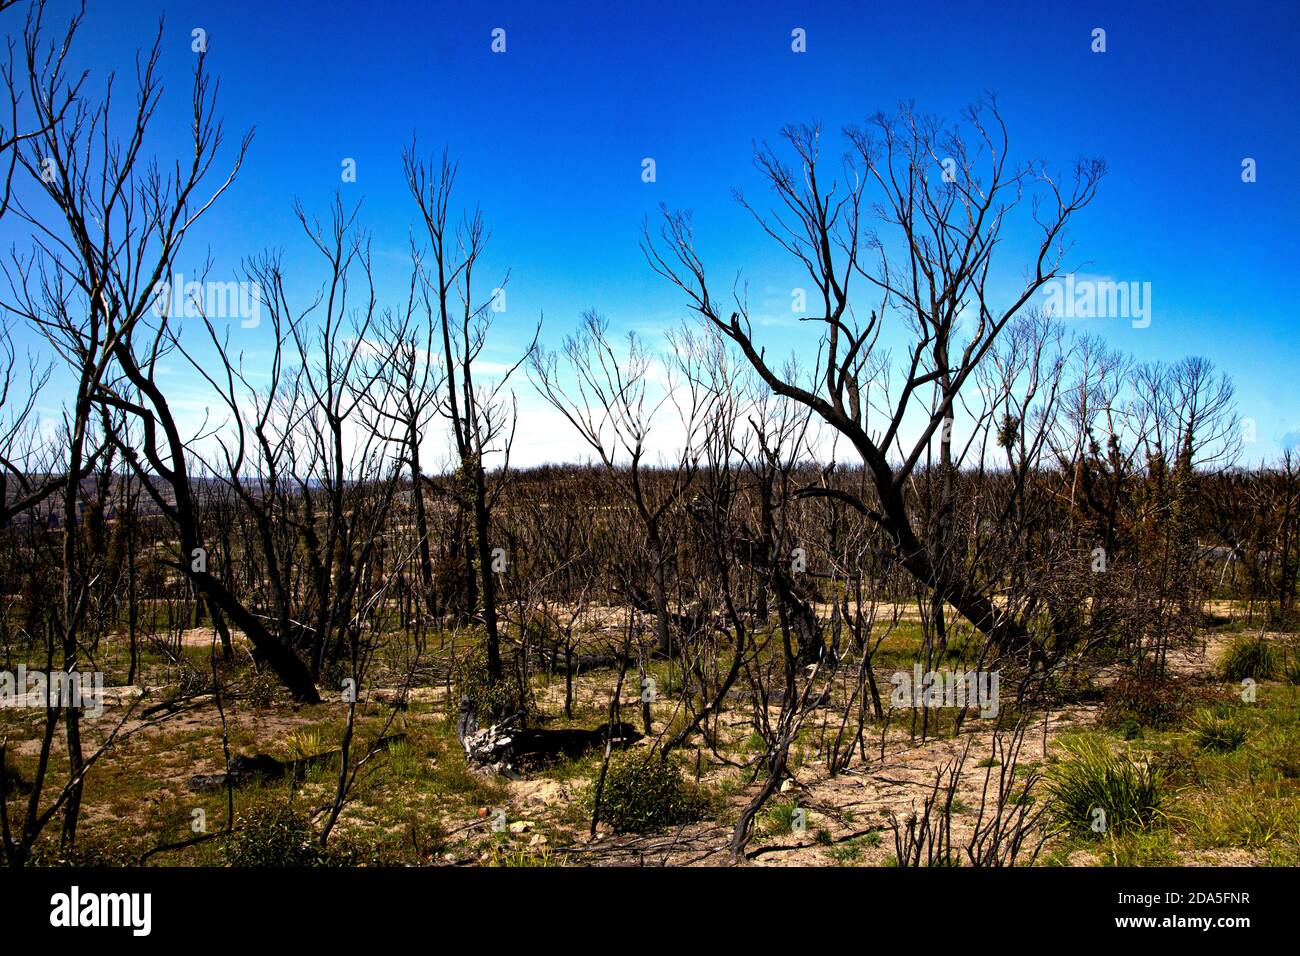 The stark landscape shows trees destroyed by recent bushfires in Southern New South Wales, during the Australian summer months Stock Photo